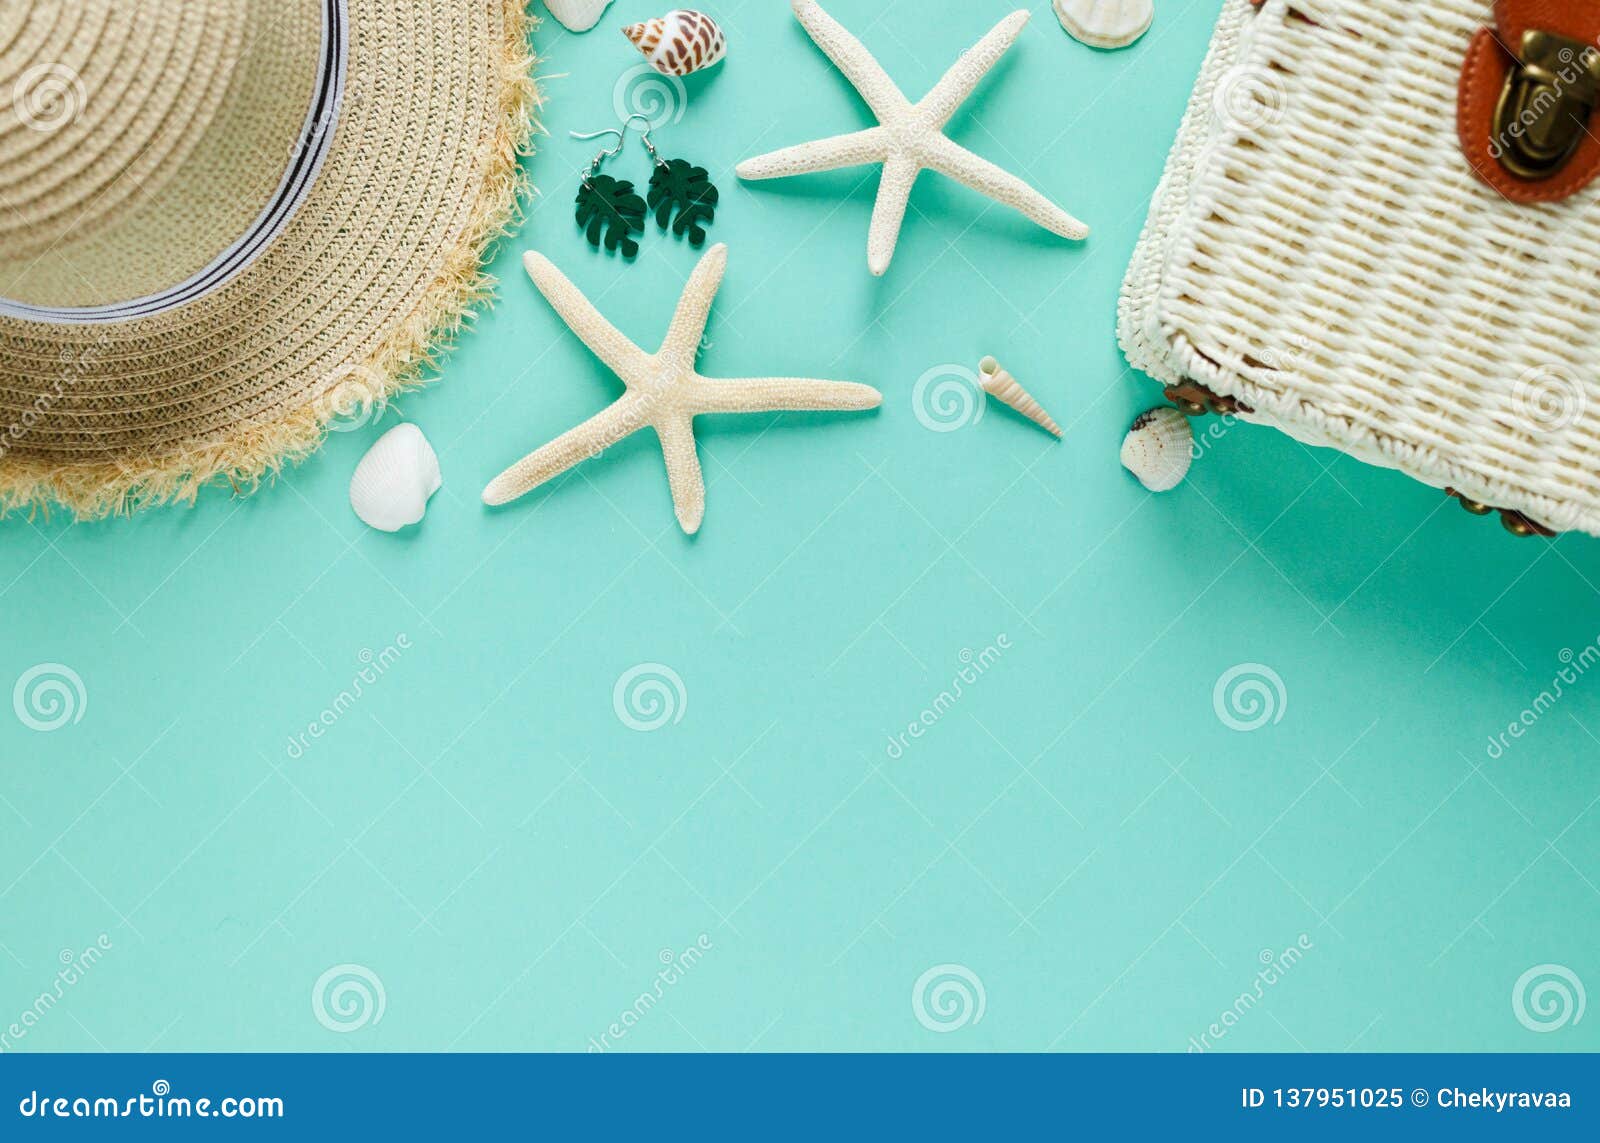 Tropic Flat Lay with Straw Hat, Bag, Starfish, Shells, Earrings on ...